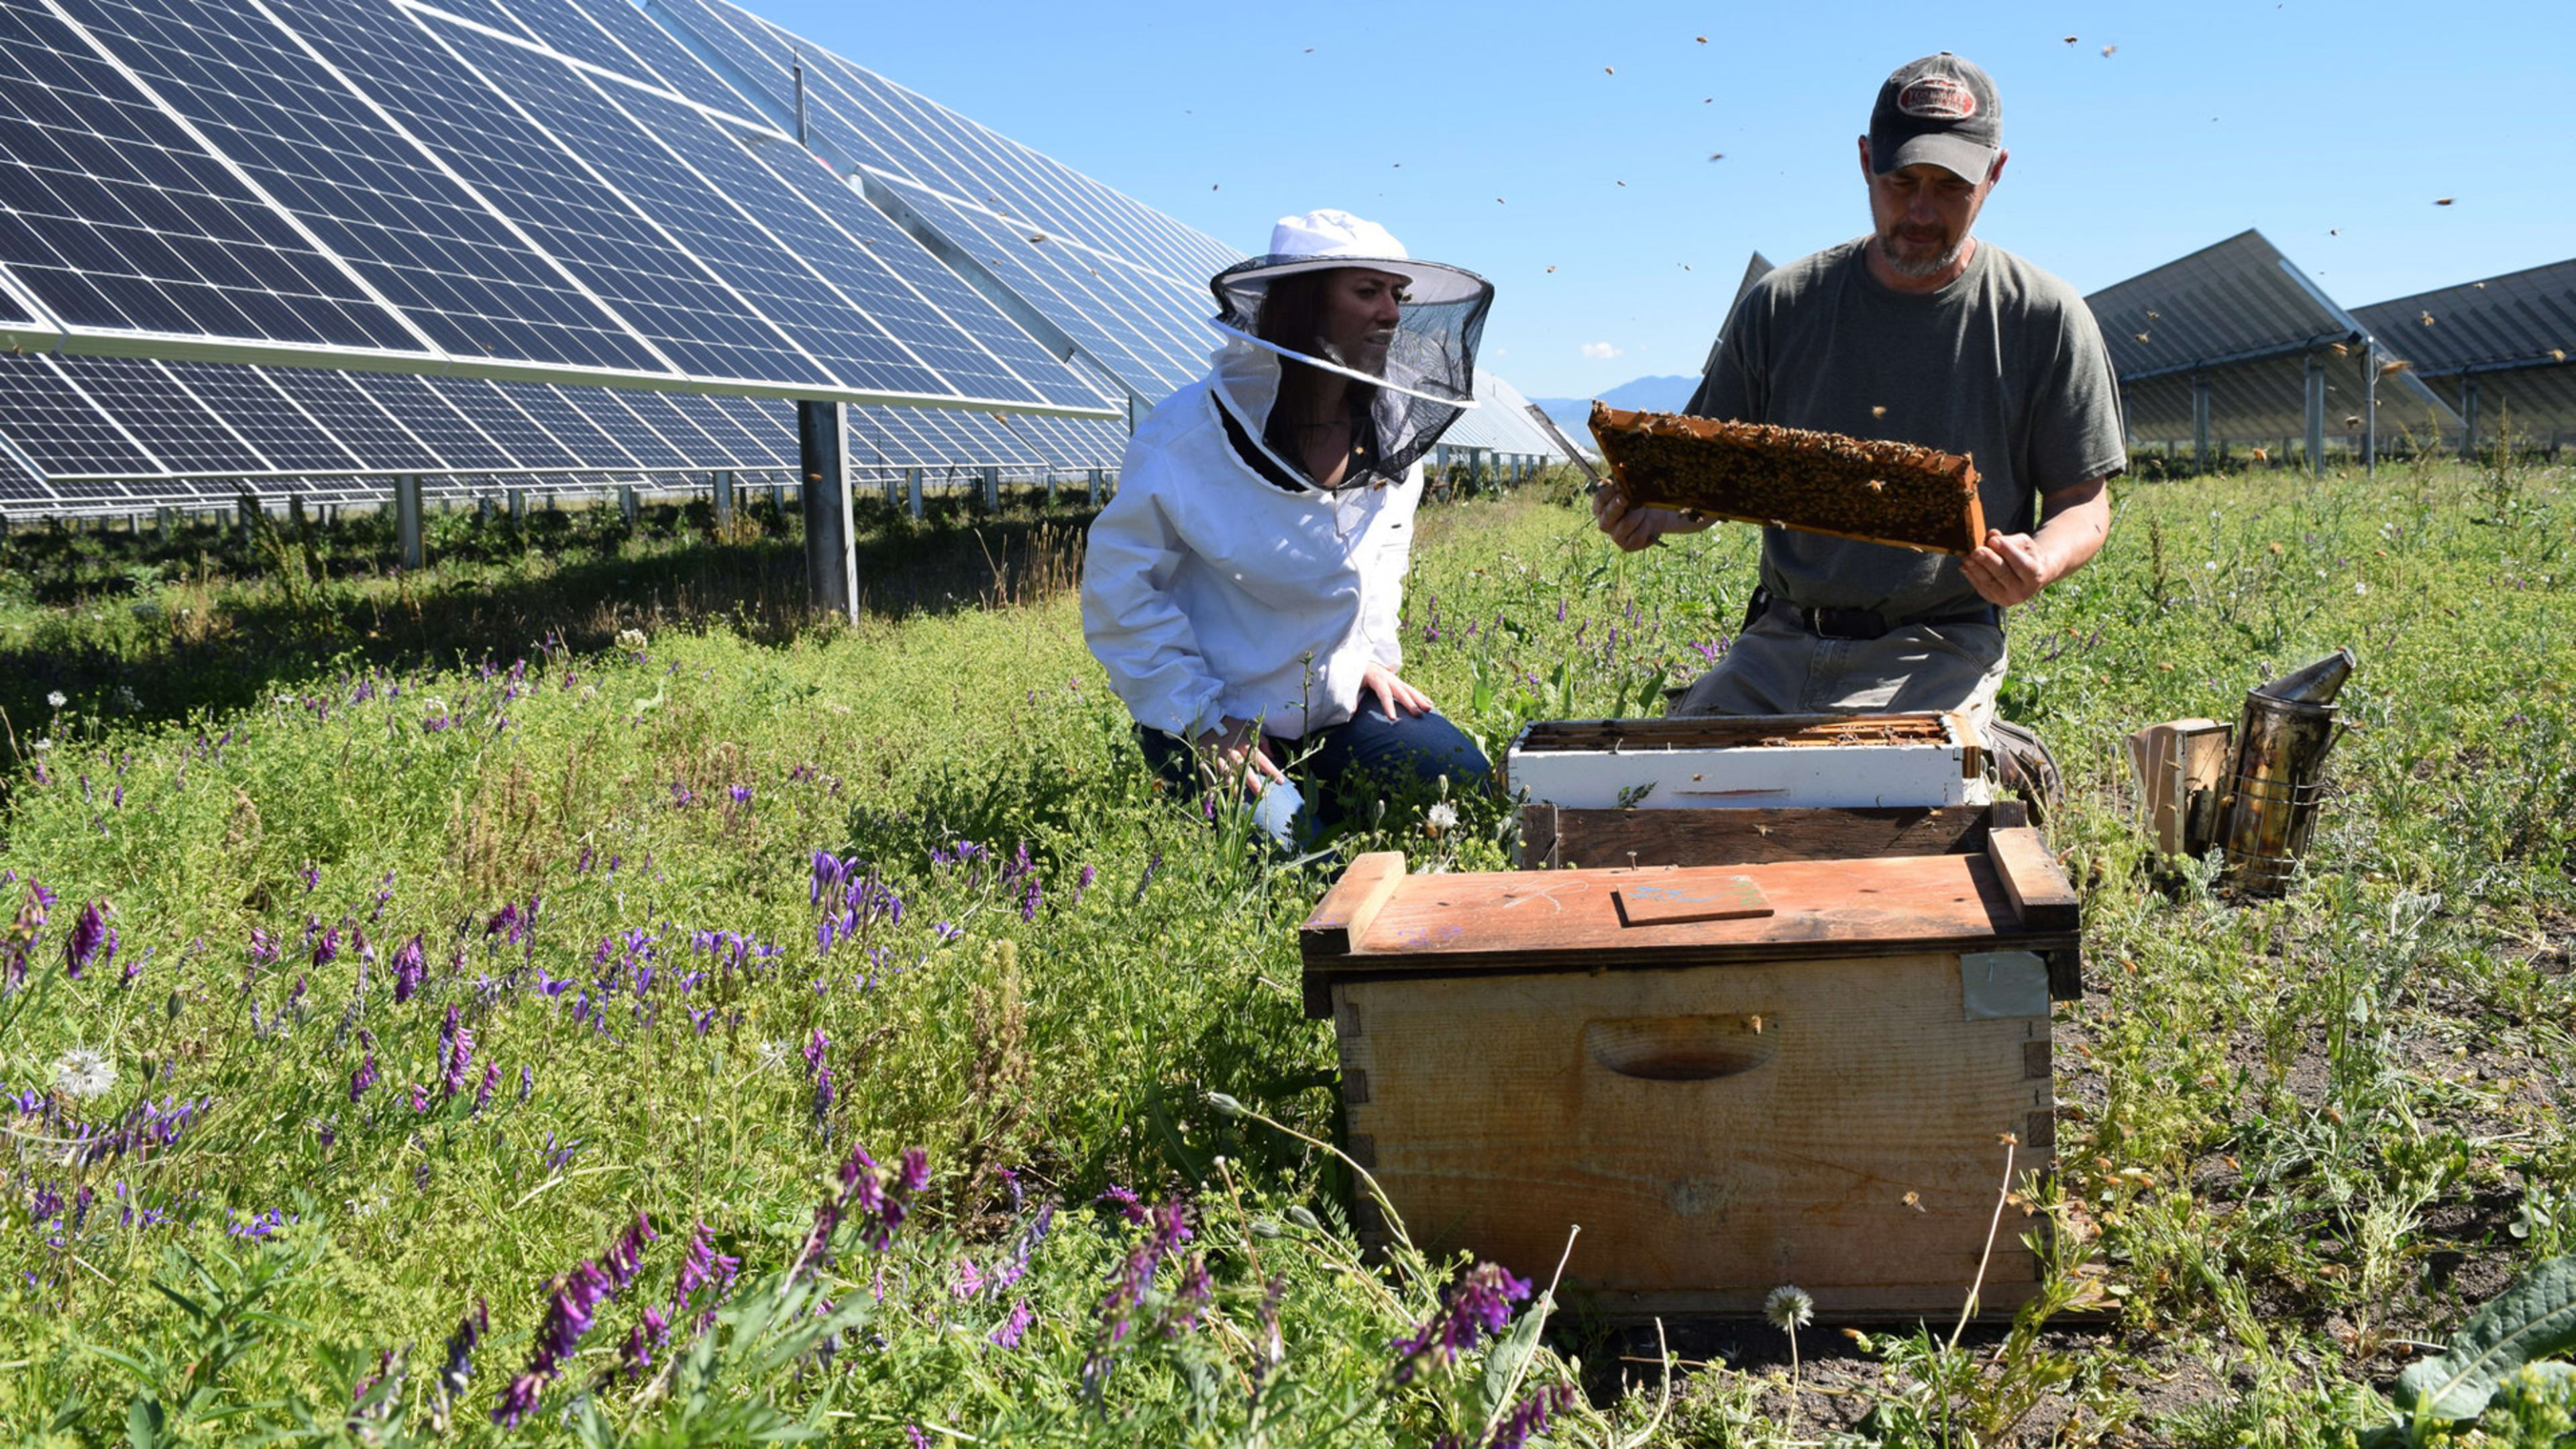 This new solar farm combines clean energy and beehives